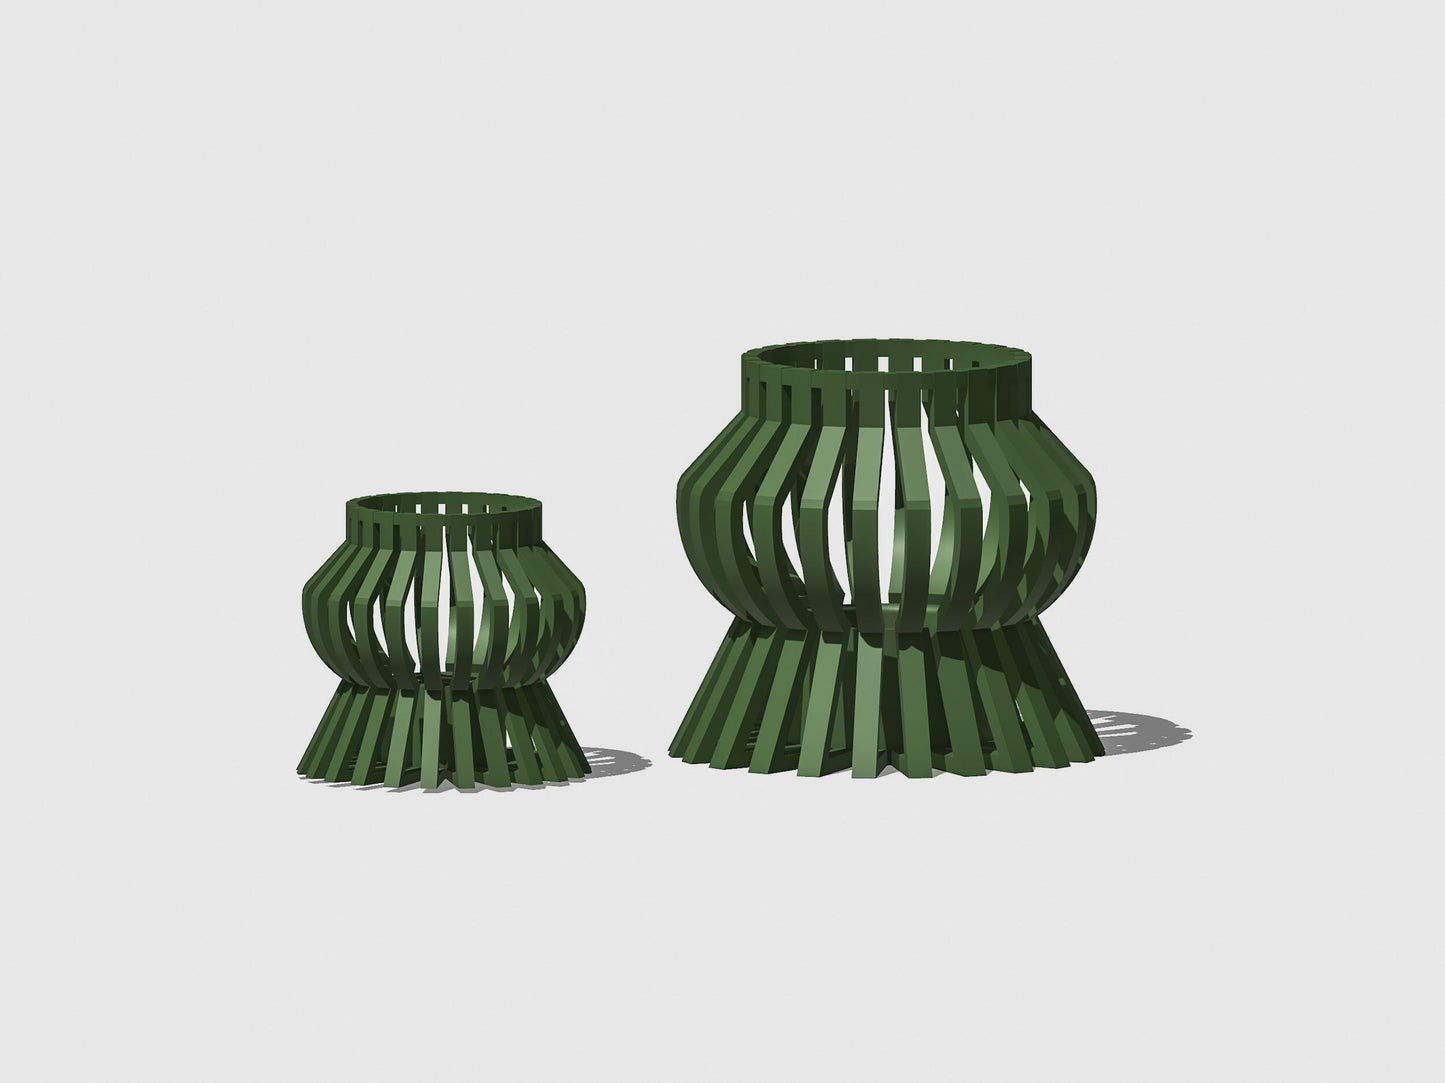 Plant Propagation Station, Bookshelf Event Decor, Multiple Sizes and Colors, 3D Printed Vase, Gifts for Plant Lovers, Modus